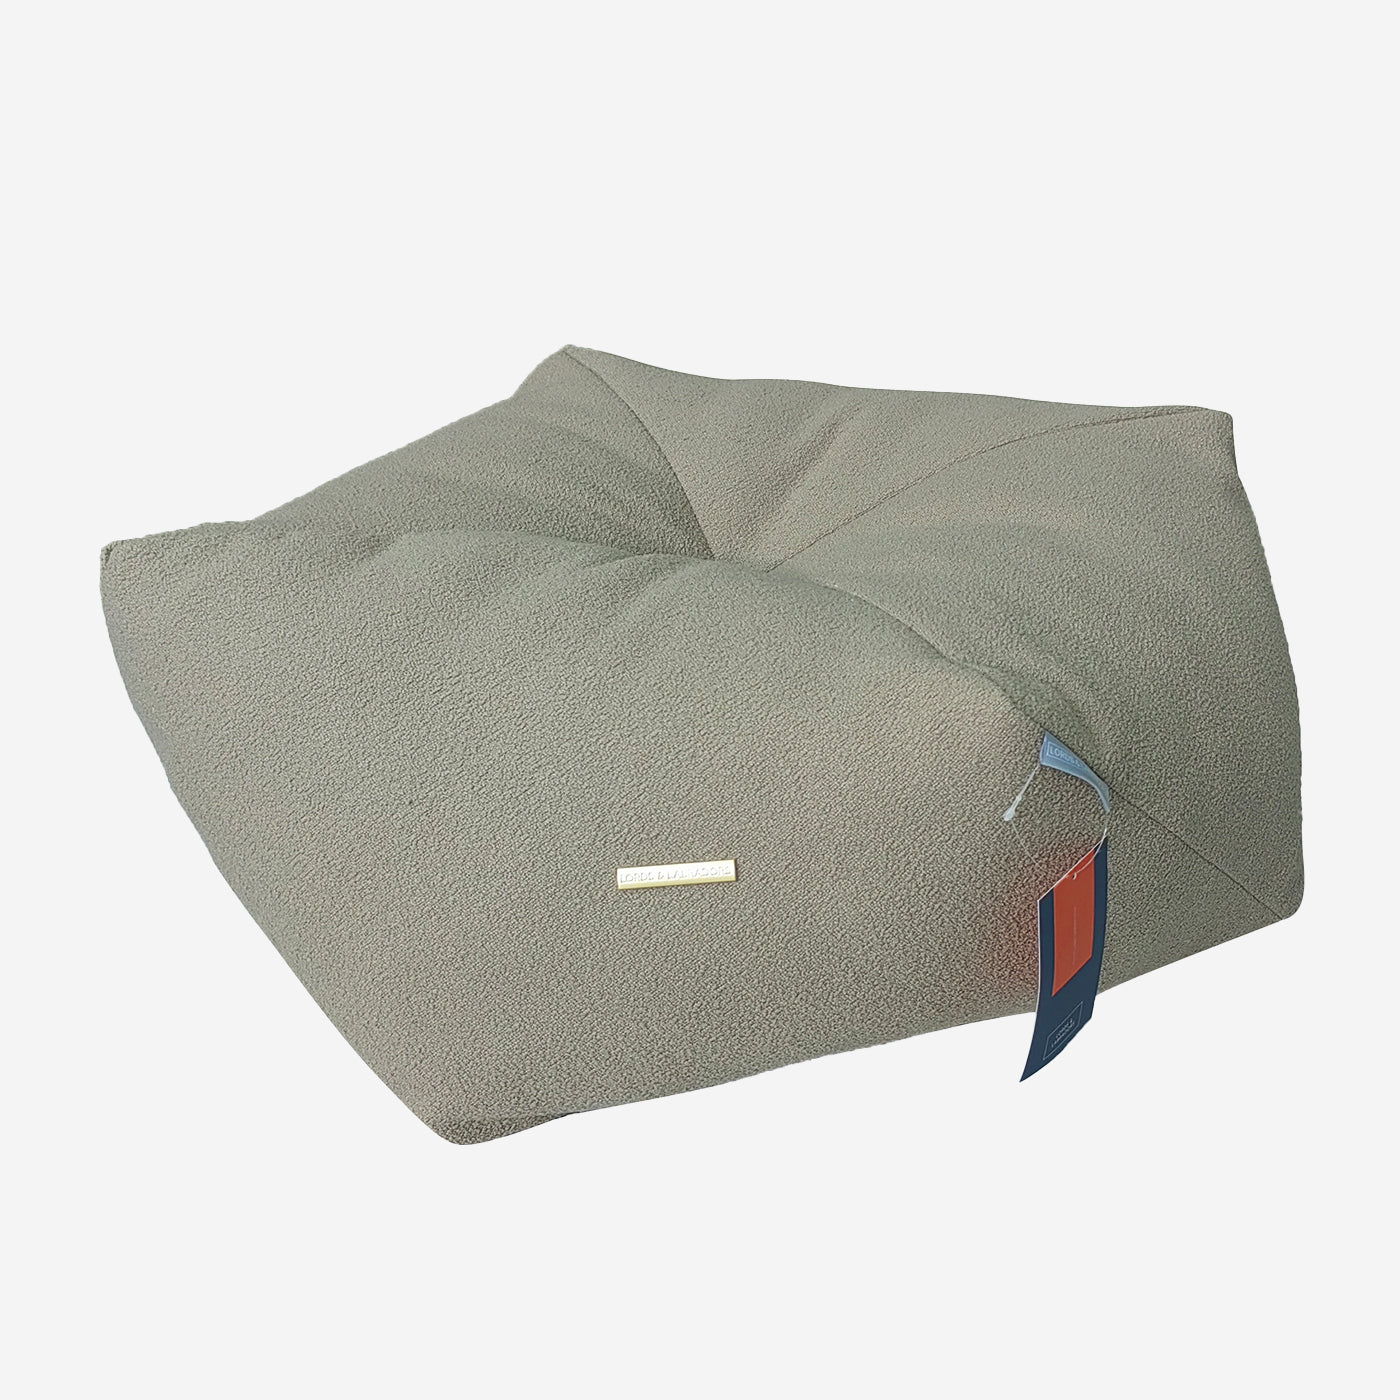 Lords & Labradors Snooze Pouff Puffy Pet Bed, Luxury Beds For Dogs, Available Now at Lords & Labradors